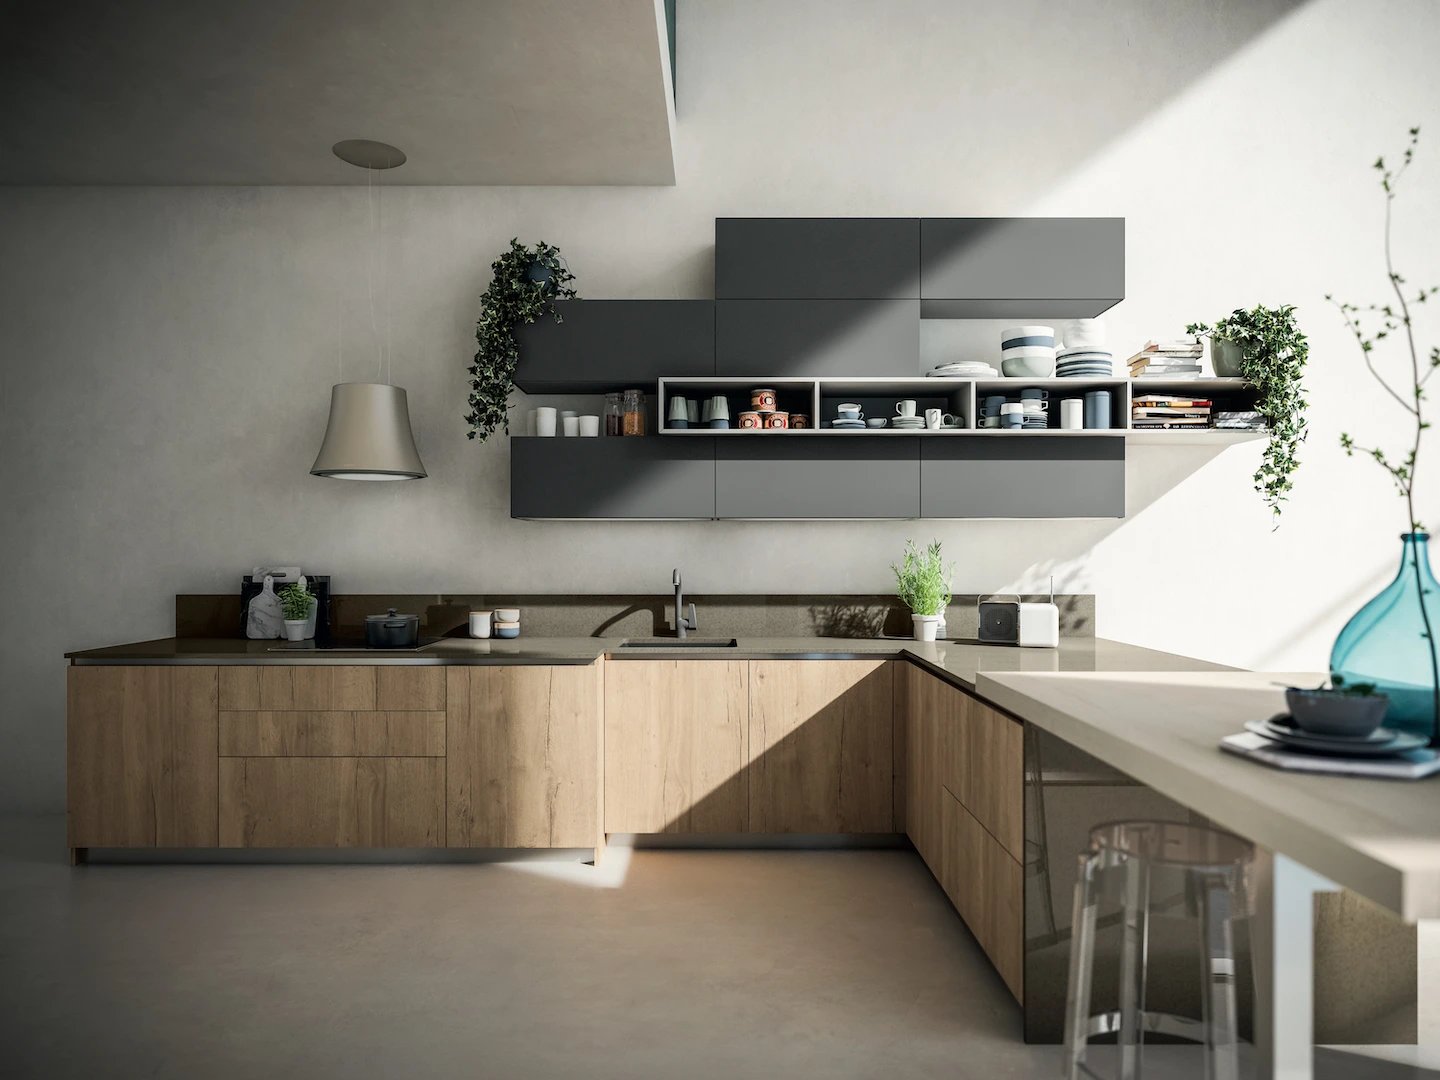 An L-shaped kitchen with numerous wooden drawers, gray cabinets, and ample 